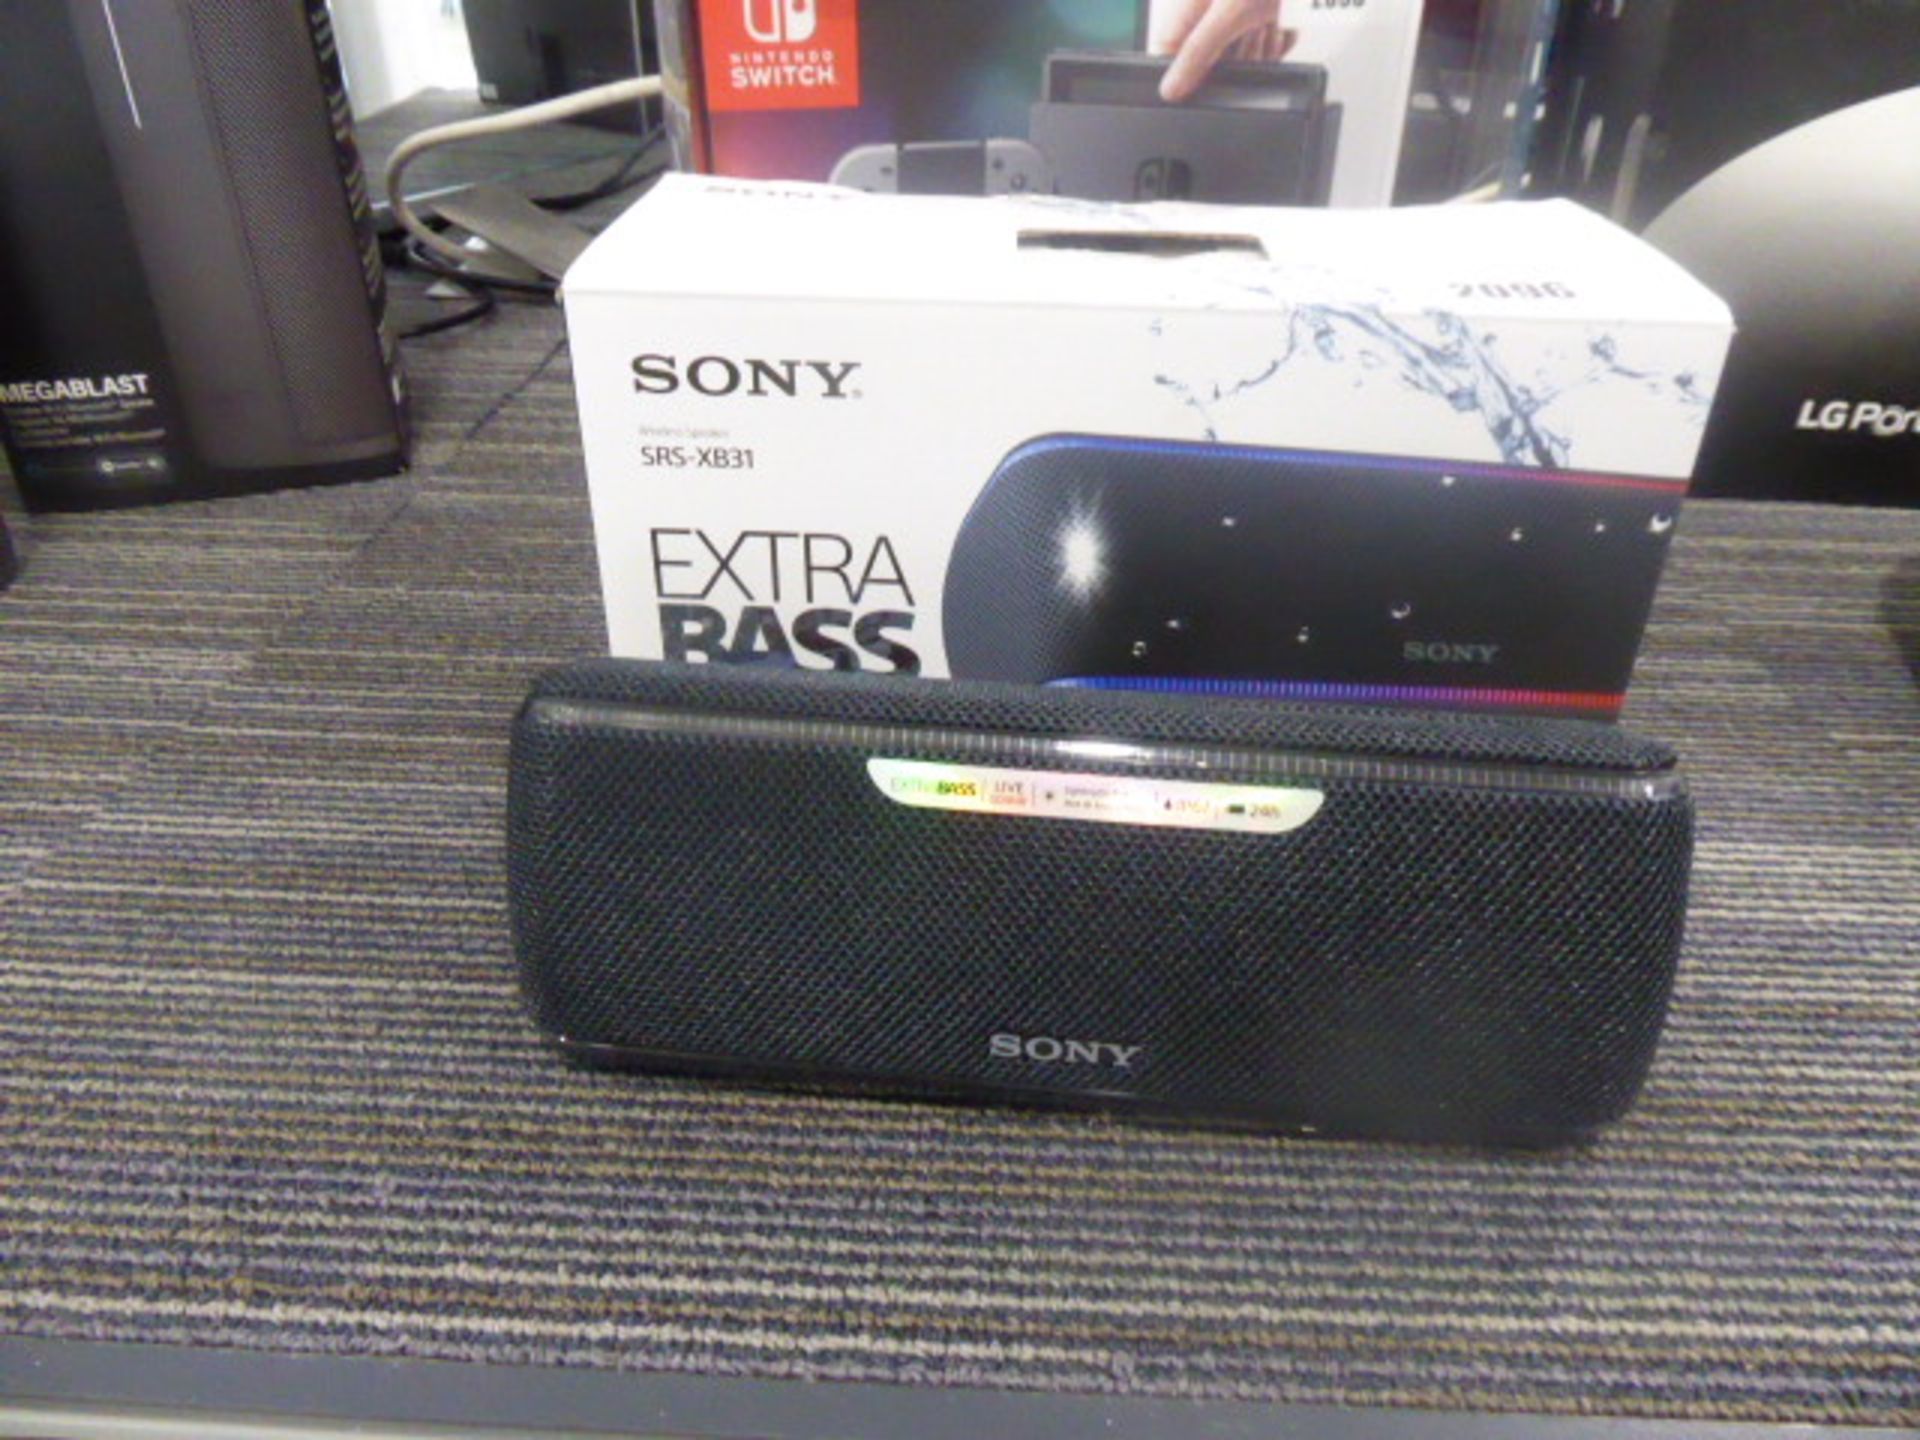 Sony SRS-XB31 portable blu-tooth speaker with box